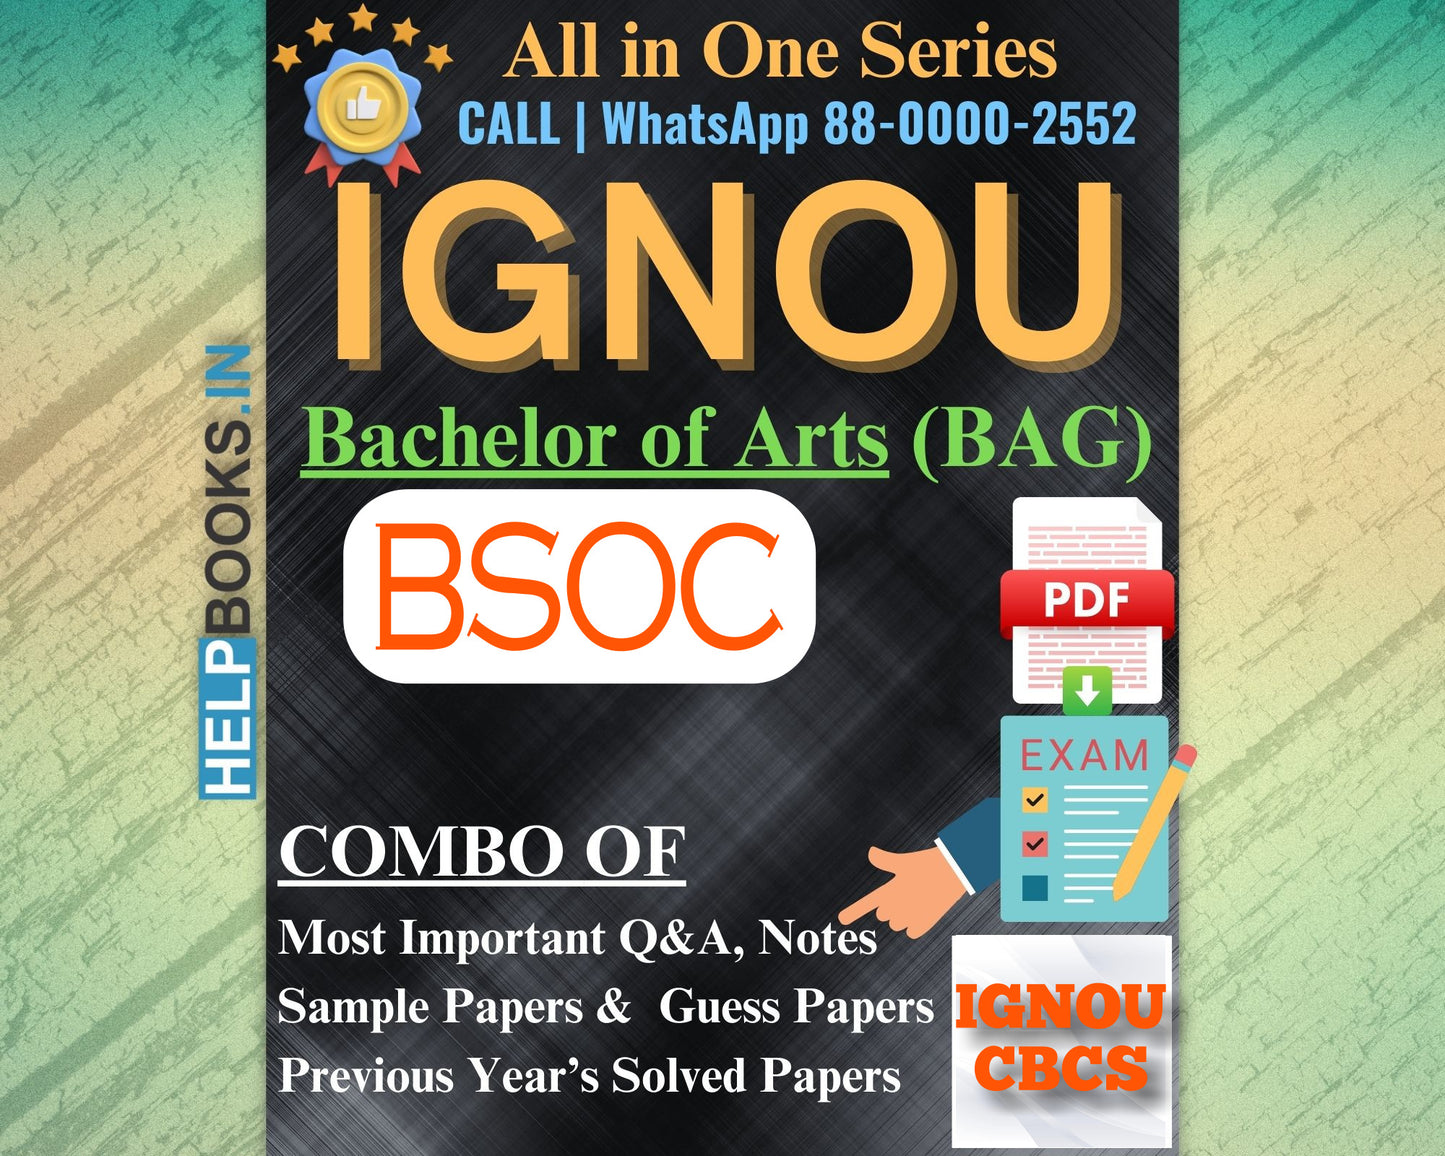 IGNOU BAG Online Study Package: Bachelor of Arts (BA) - Previous Year’s Solved Papers, Q&A, Exam Notes, Sample Papers, Guess Papers-BSOC131, BSOC132, BSOC133, BSOC134